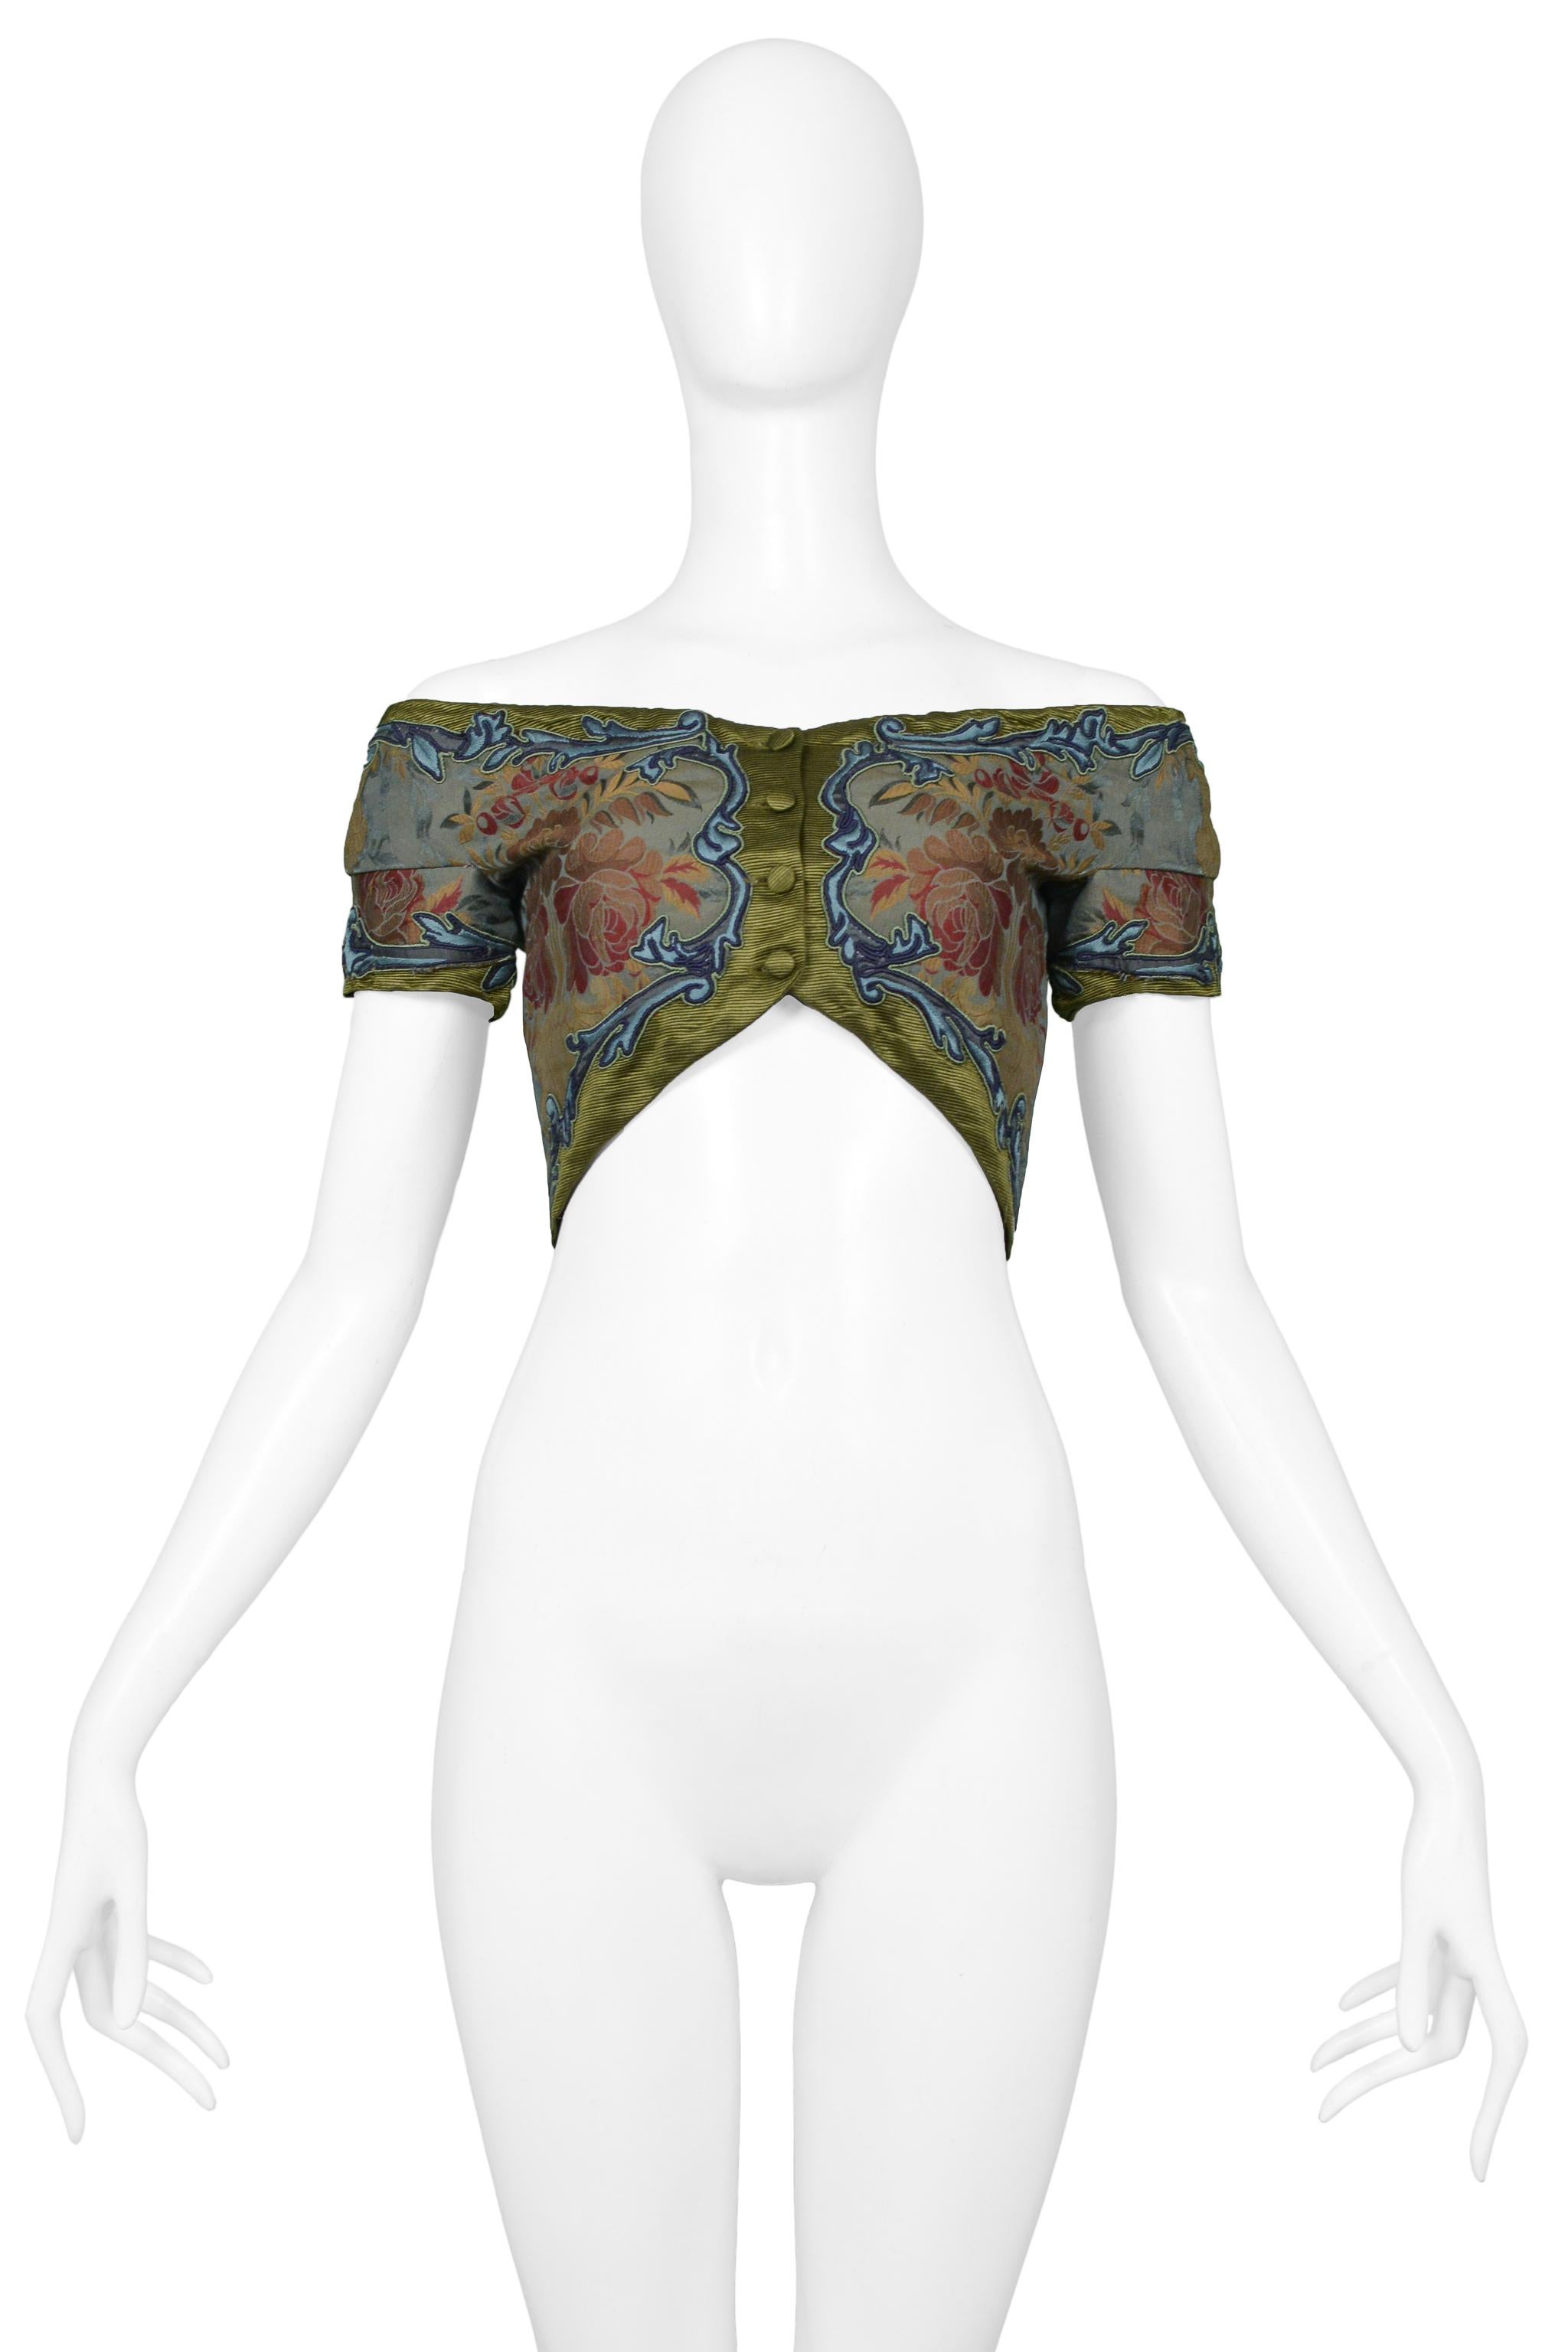 Resurrection Vintage is excited to present a vintage Romeo Gigli silk bustier featuring front button closures, floral patterns, and beautiful embroidery.

Romeo Gigli
Size: 42
Silk
Excellent Vintage Condition 
Authenticity Guaranteed 